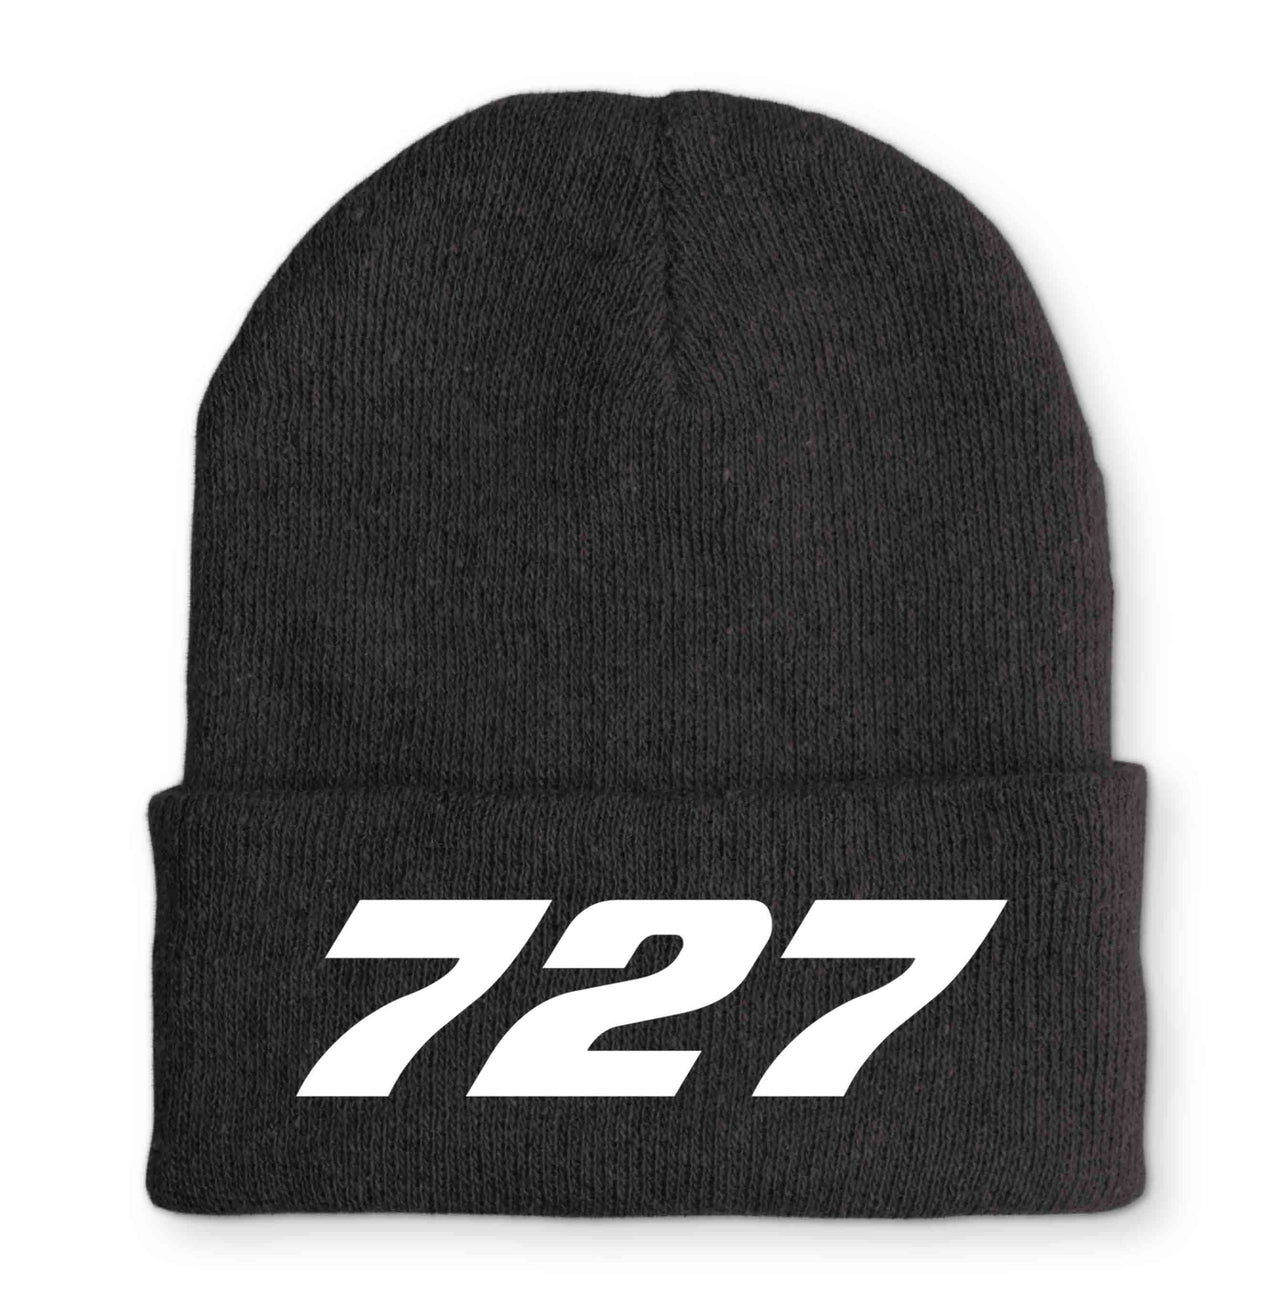 727 Flat Text Embroidered Beanies